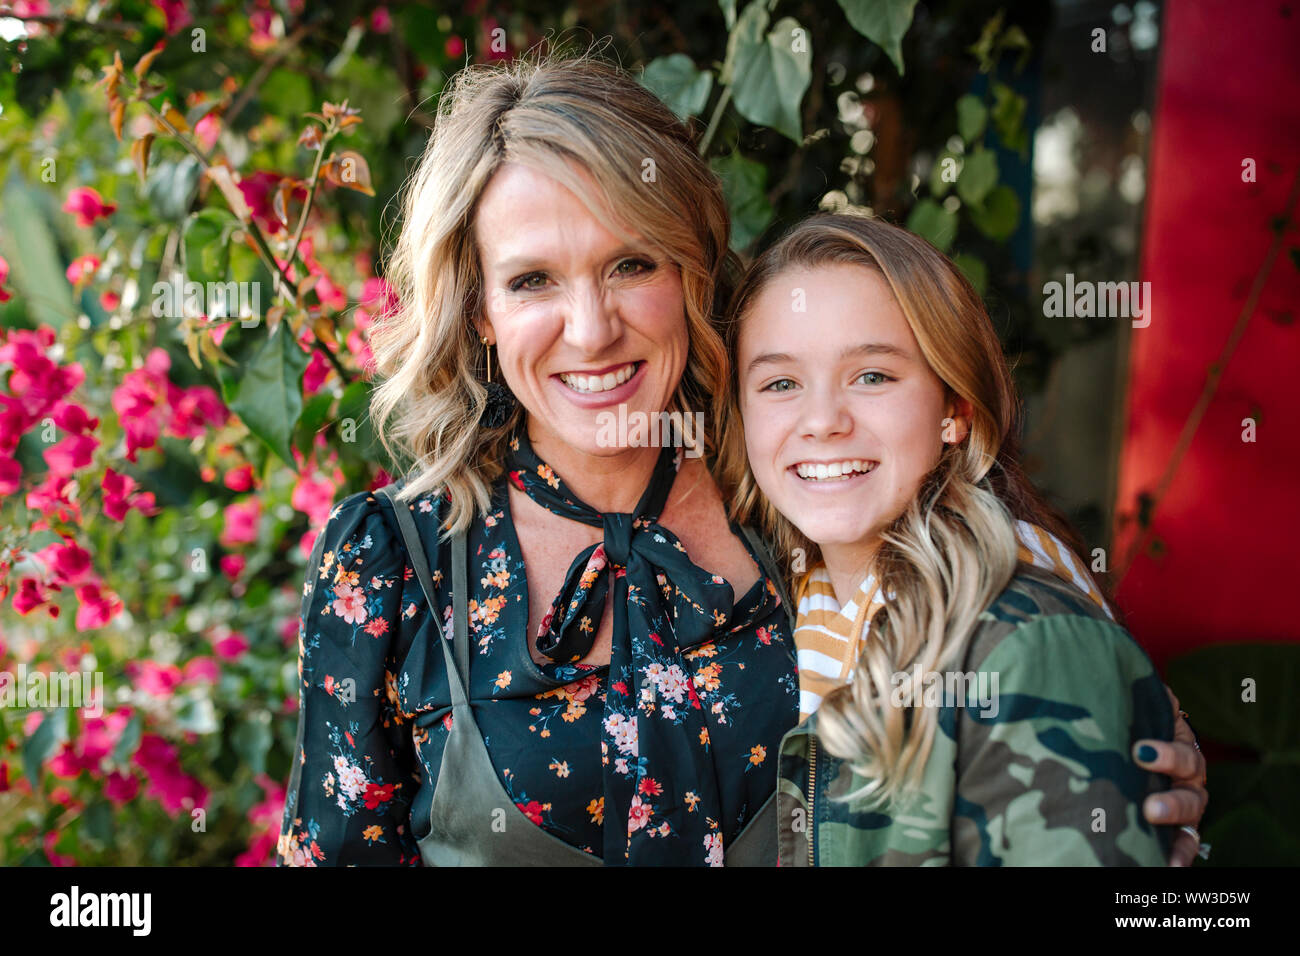 Smiling mother and daughter in front of red flowers on sunny day Stock Photo